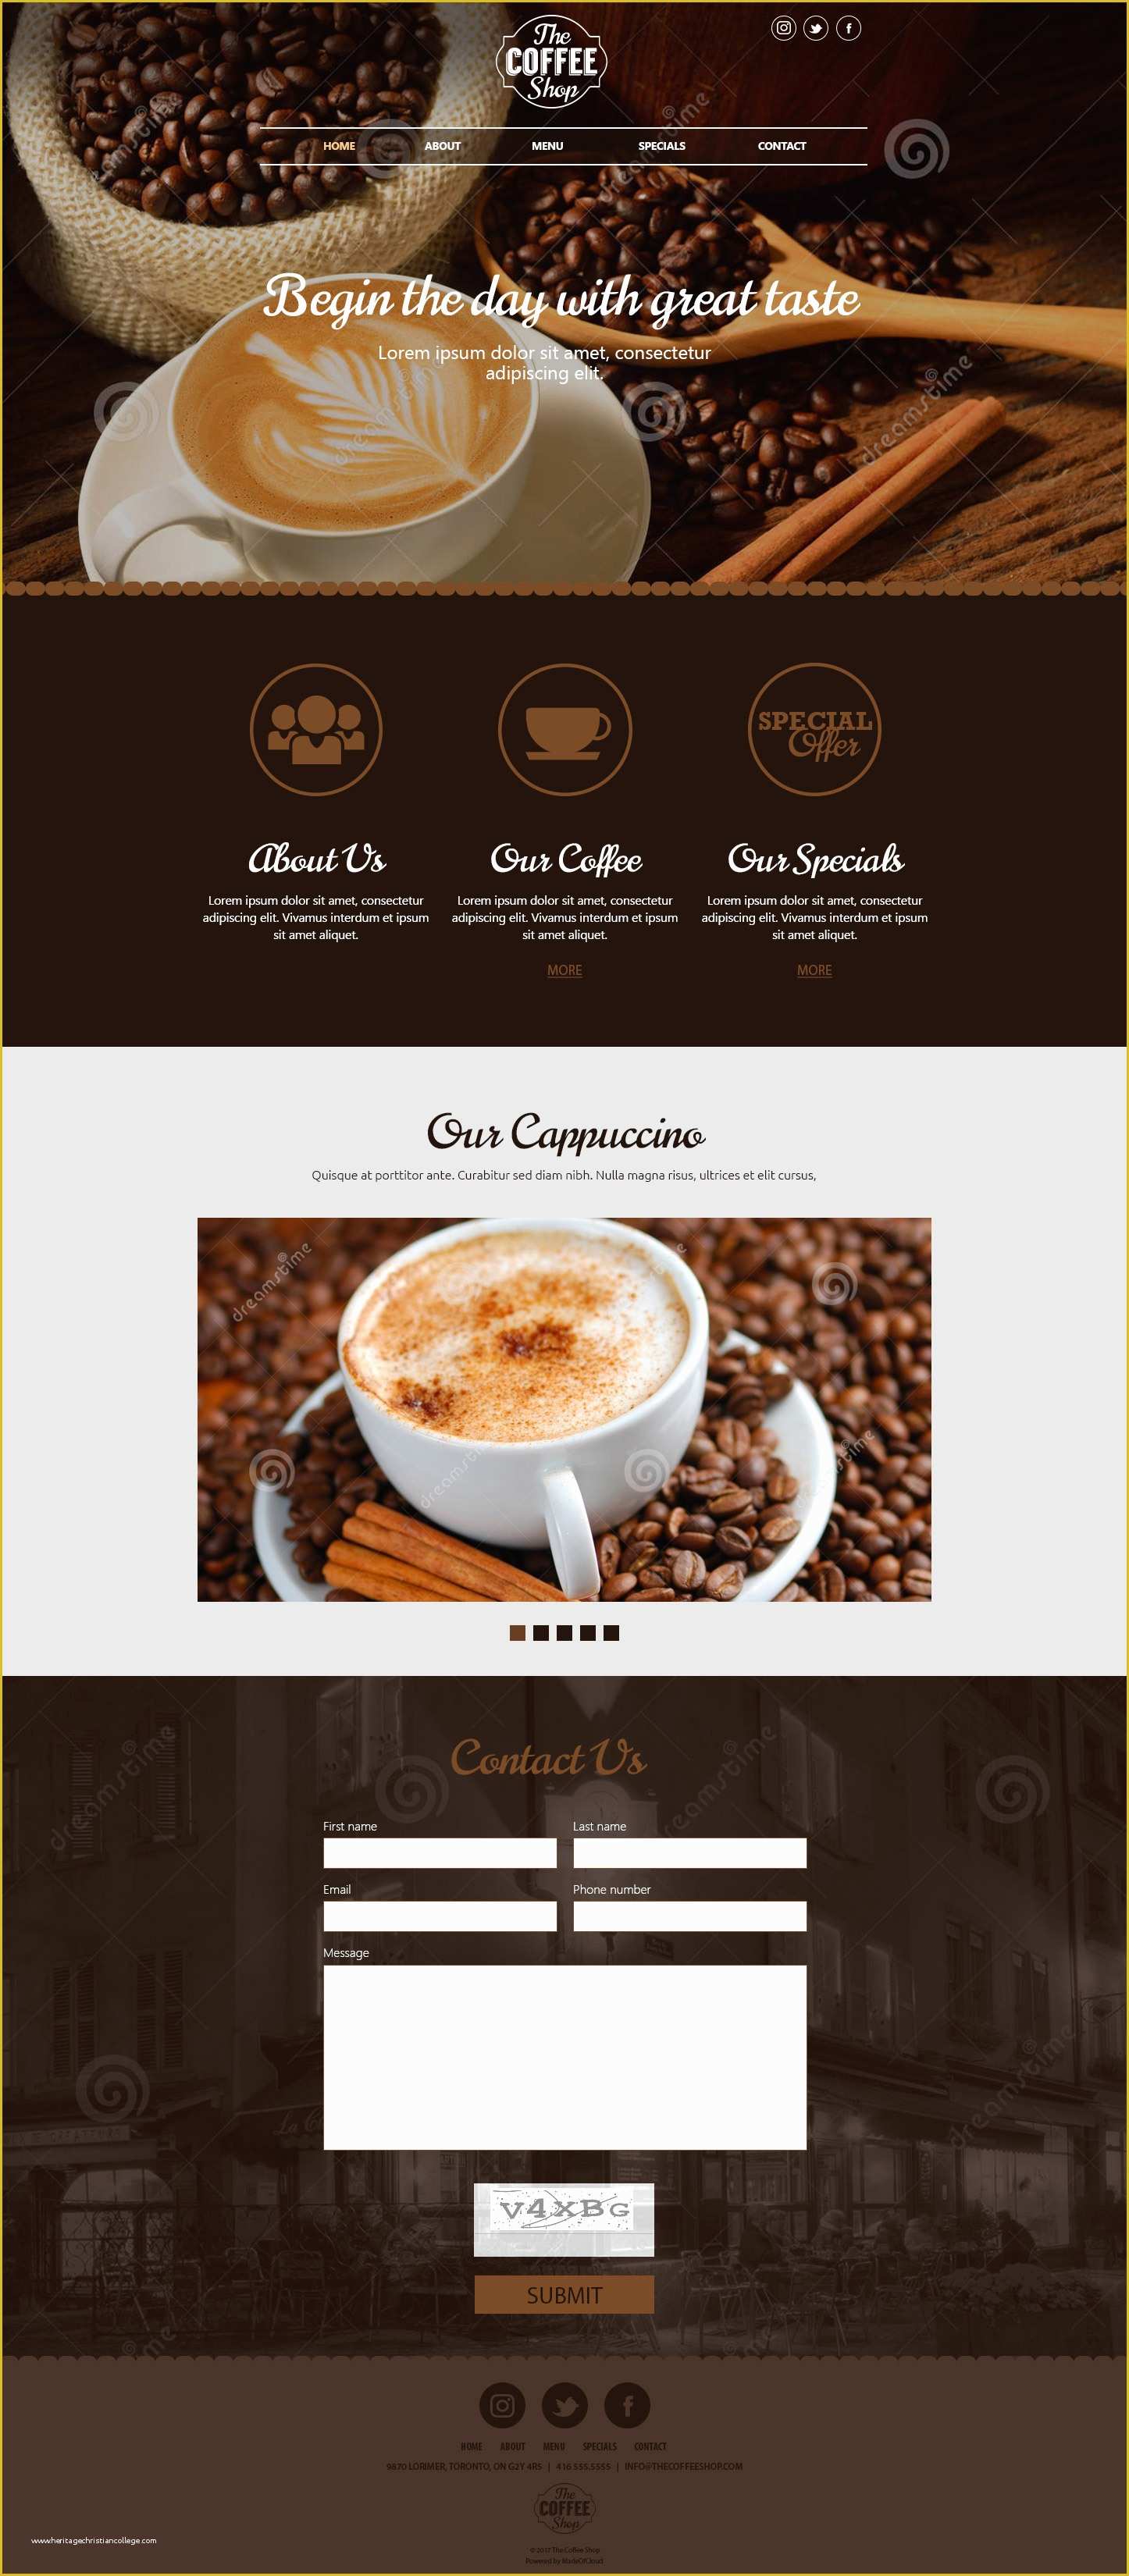 Coffee Shop Website Template Free Of Coffee Shop Made Of Cloud